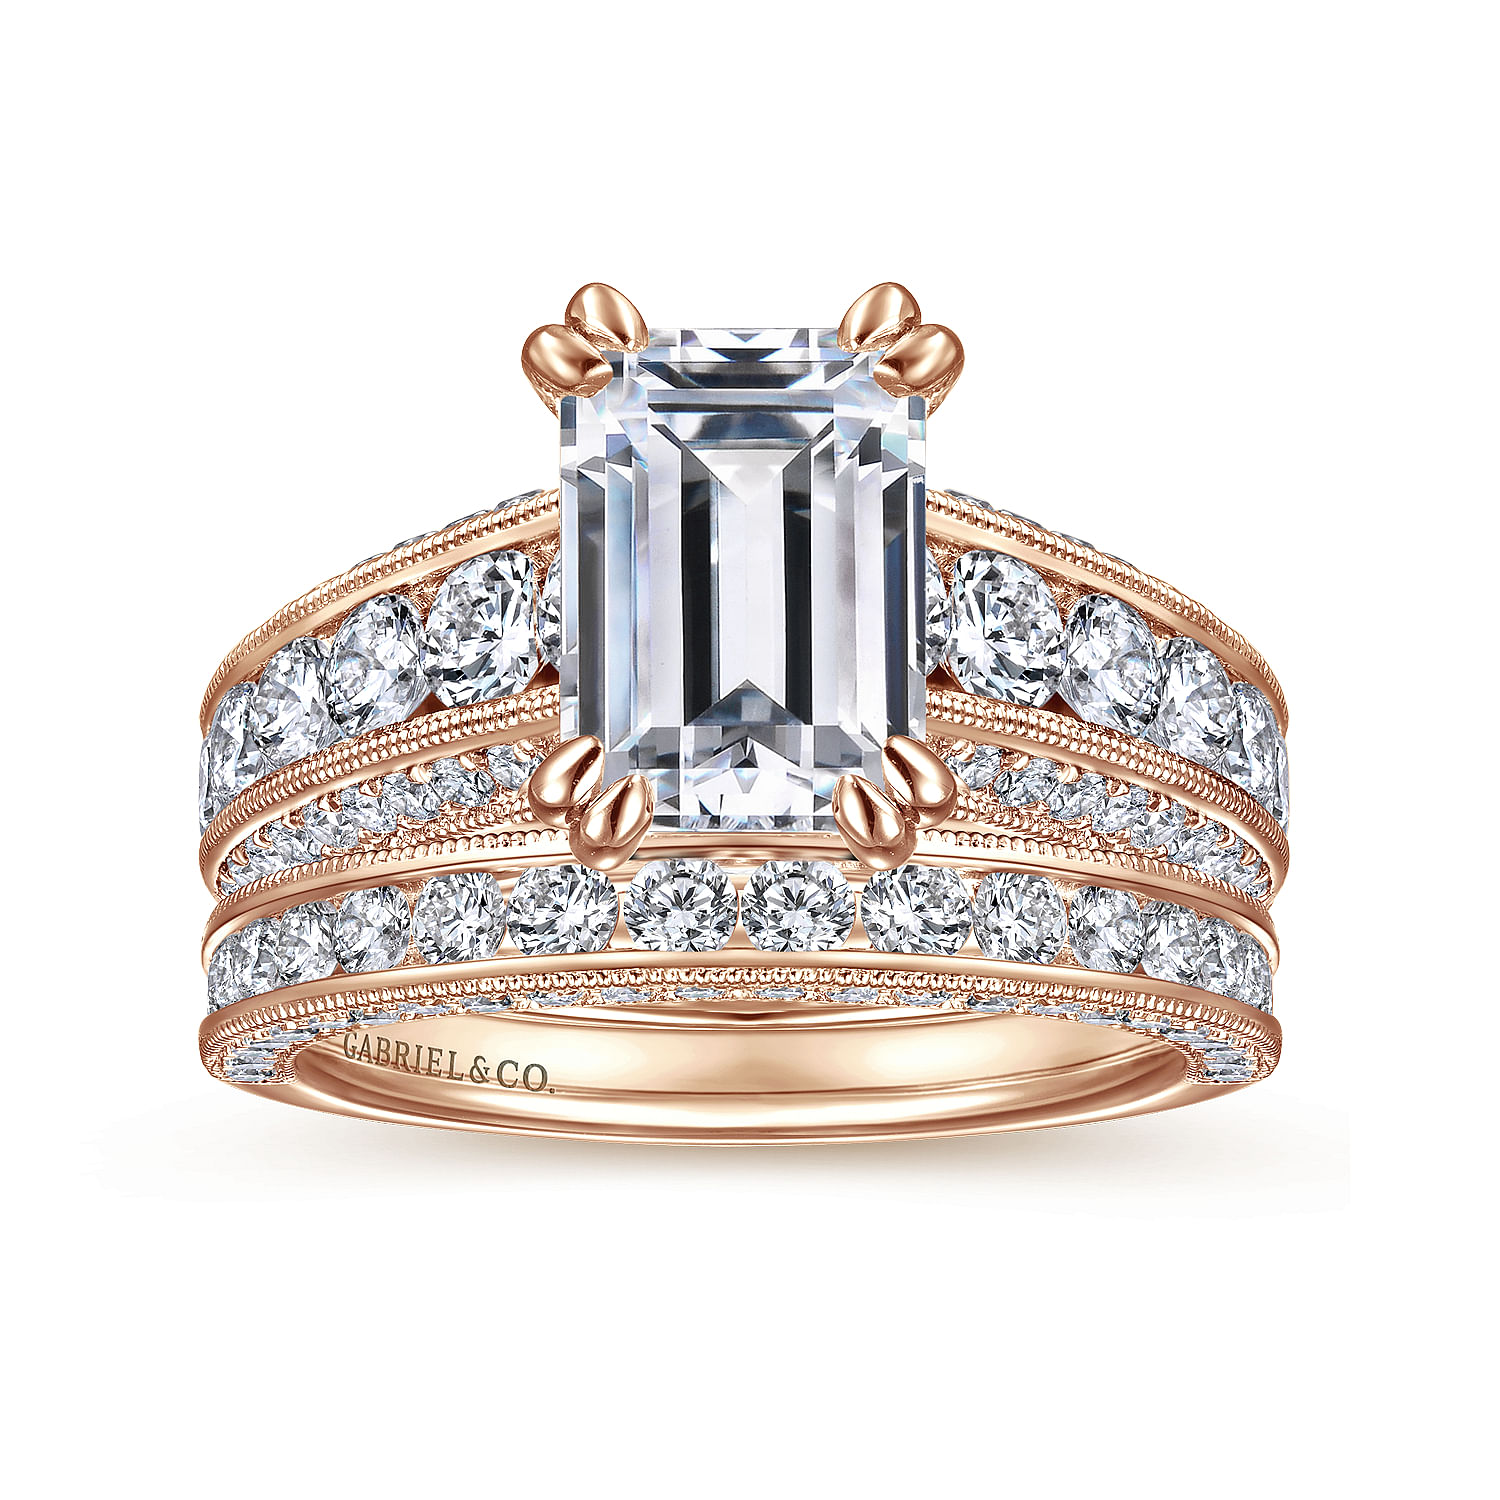 Vintage Inspired 14K Rose Gold Wide Band Emerald Cut Diamond Engagement Ring